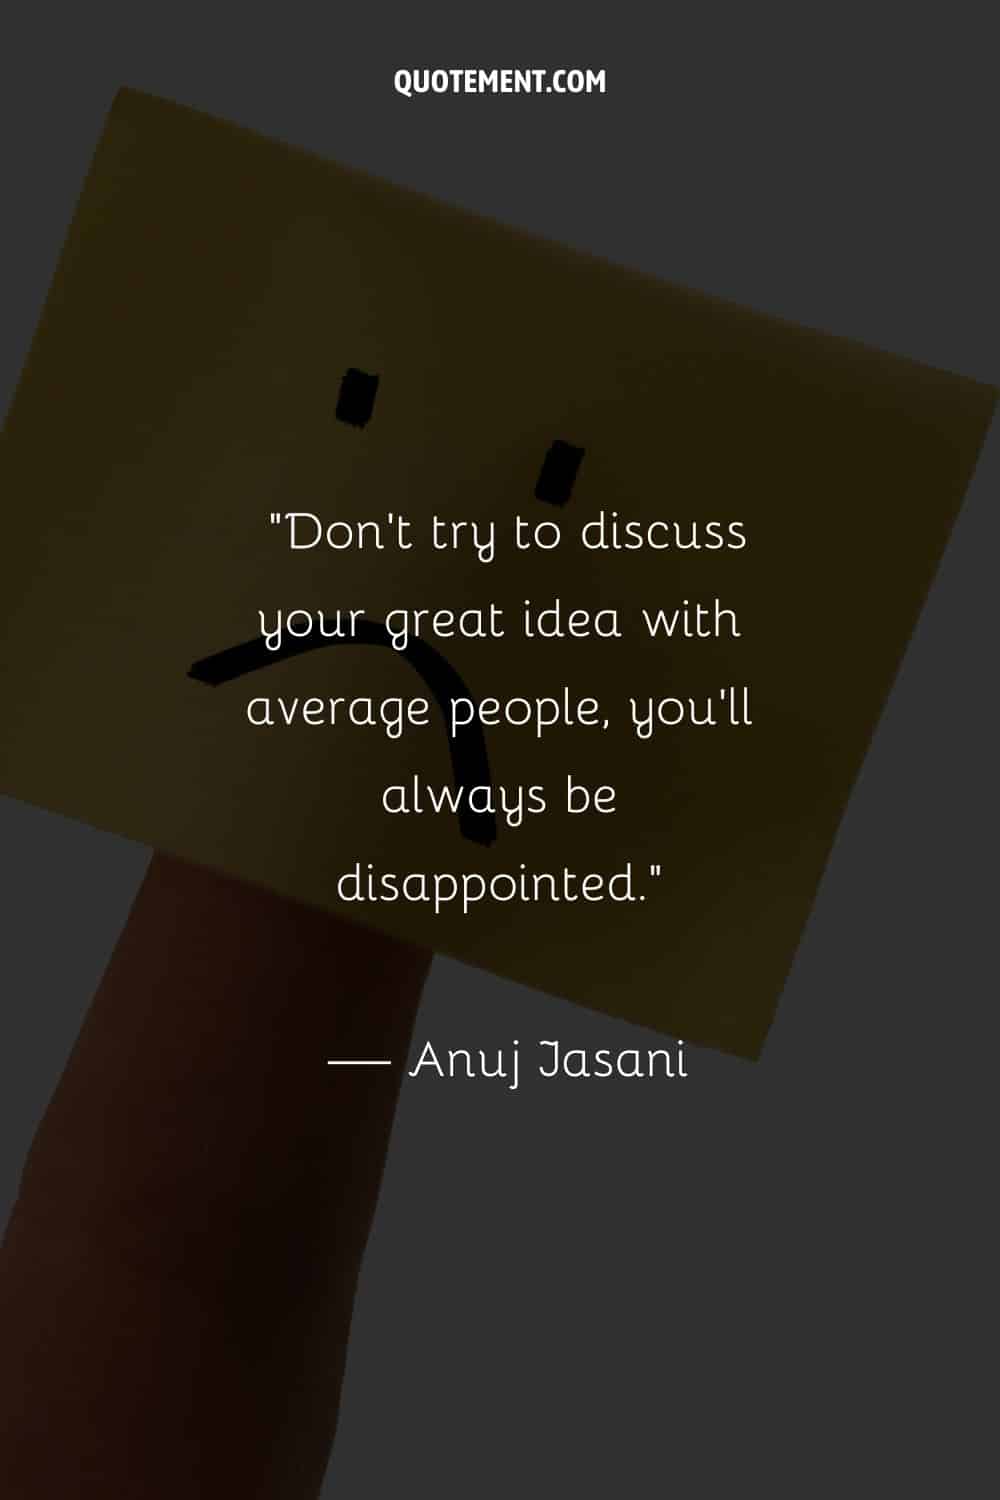 Don't try to discuss your great idea with average people, you'll always be disappointed